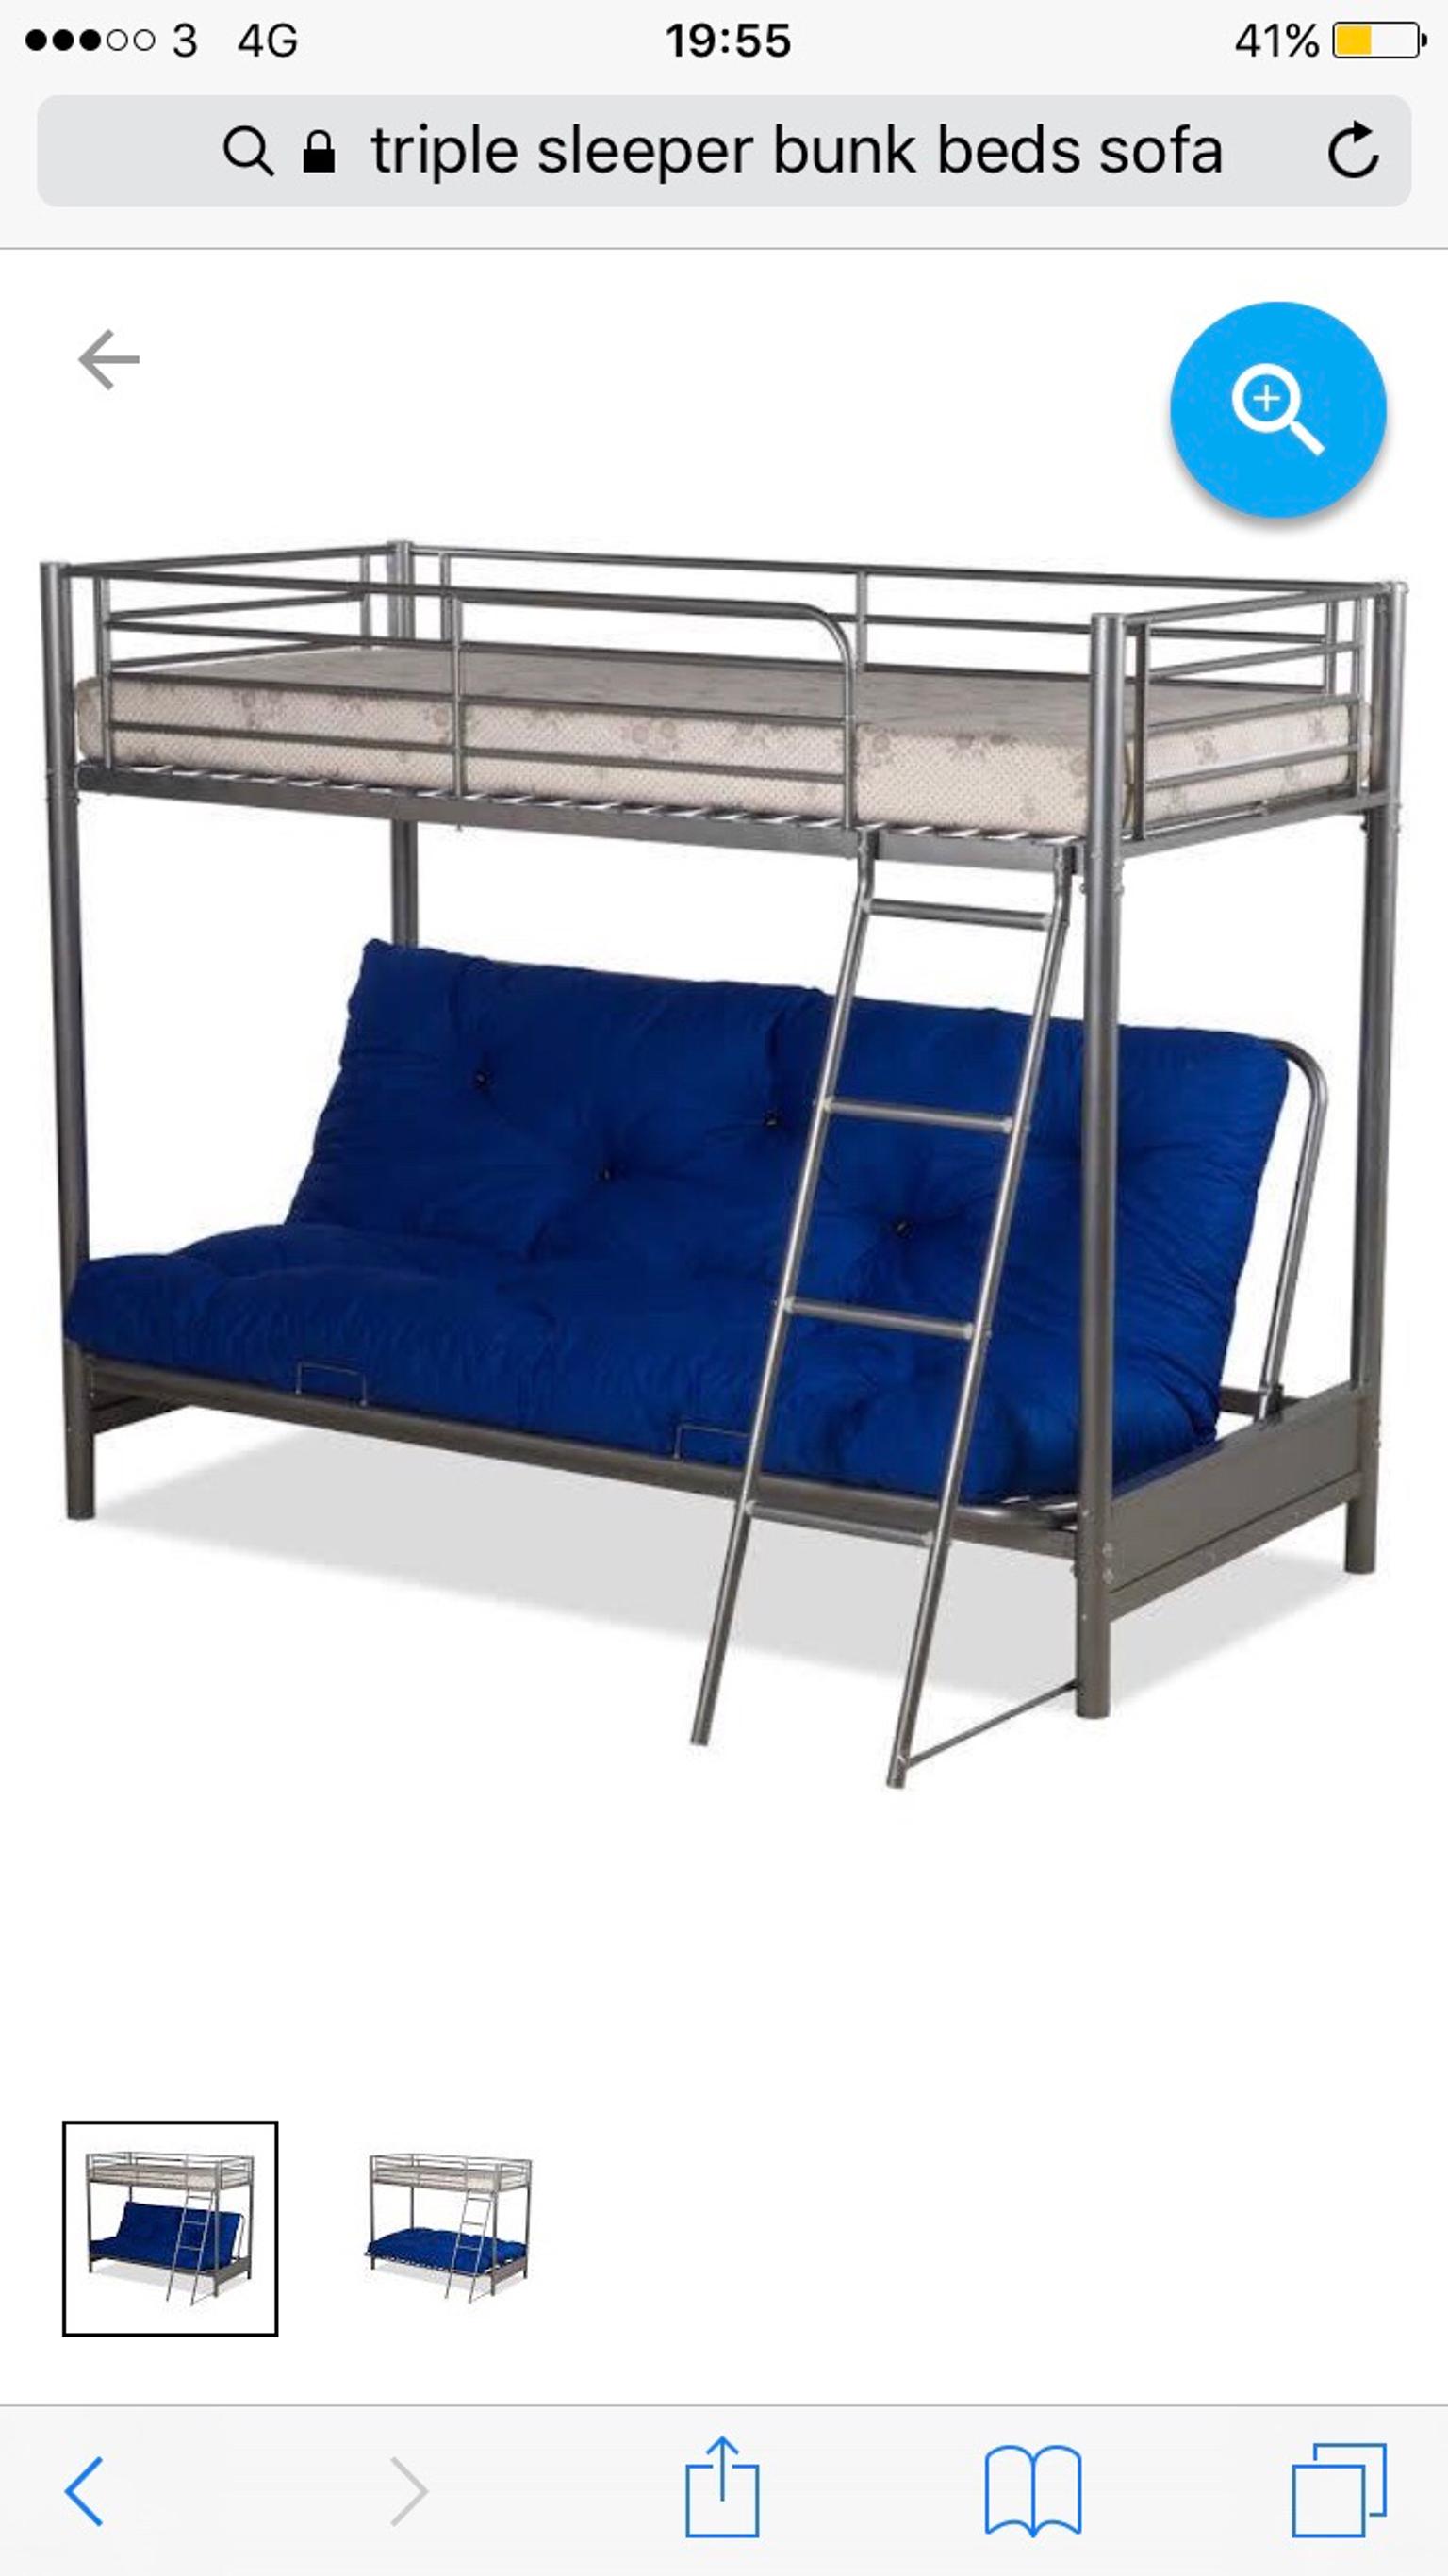 Bunk Bed In Ol12 Rochdale For 50 00, Used Futon Bunk Bed